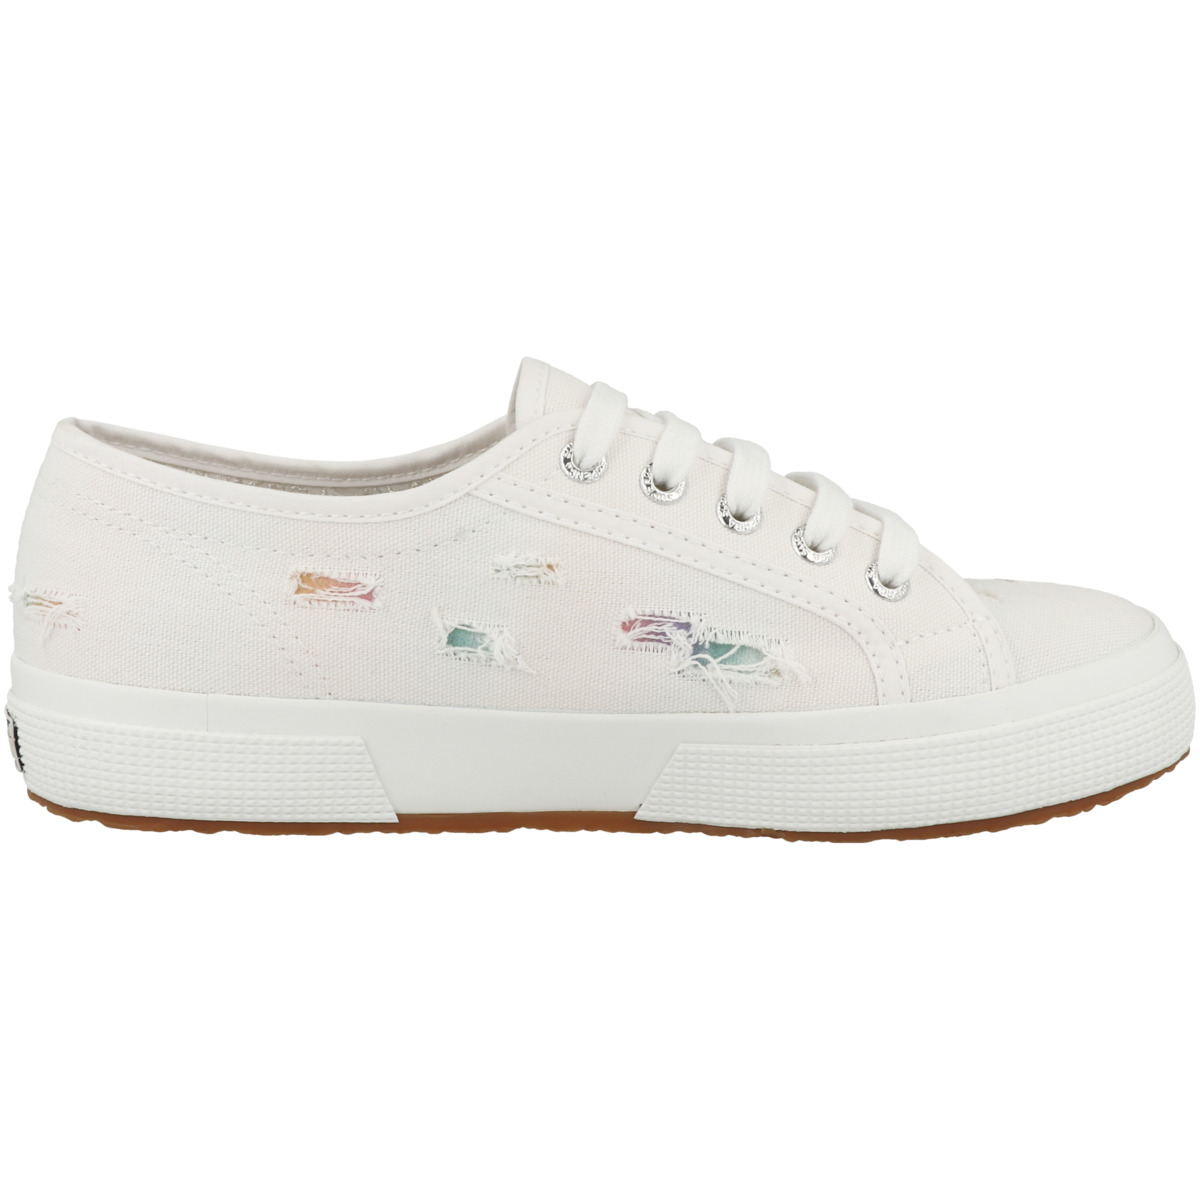 Superga 2750 Ripped Multicolor Cotton Sneaker weiss